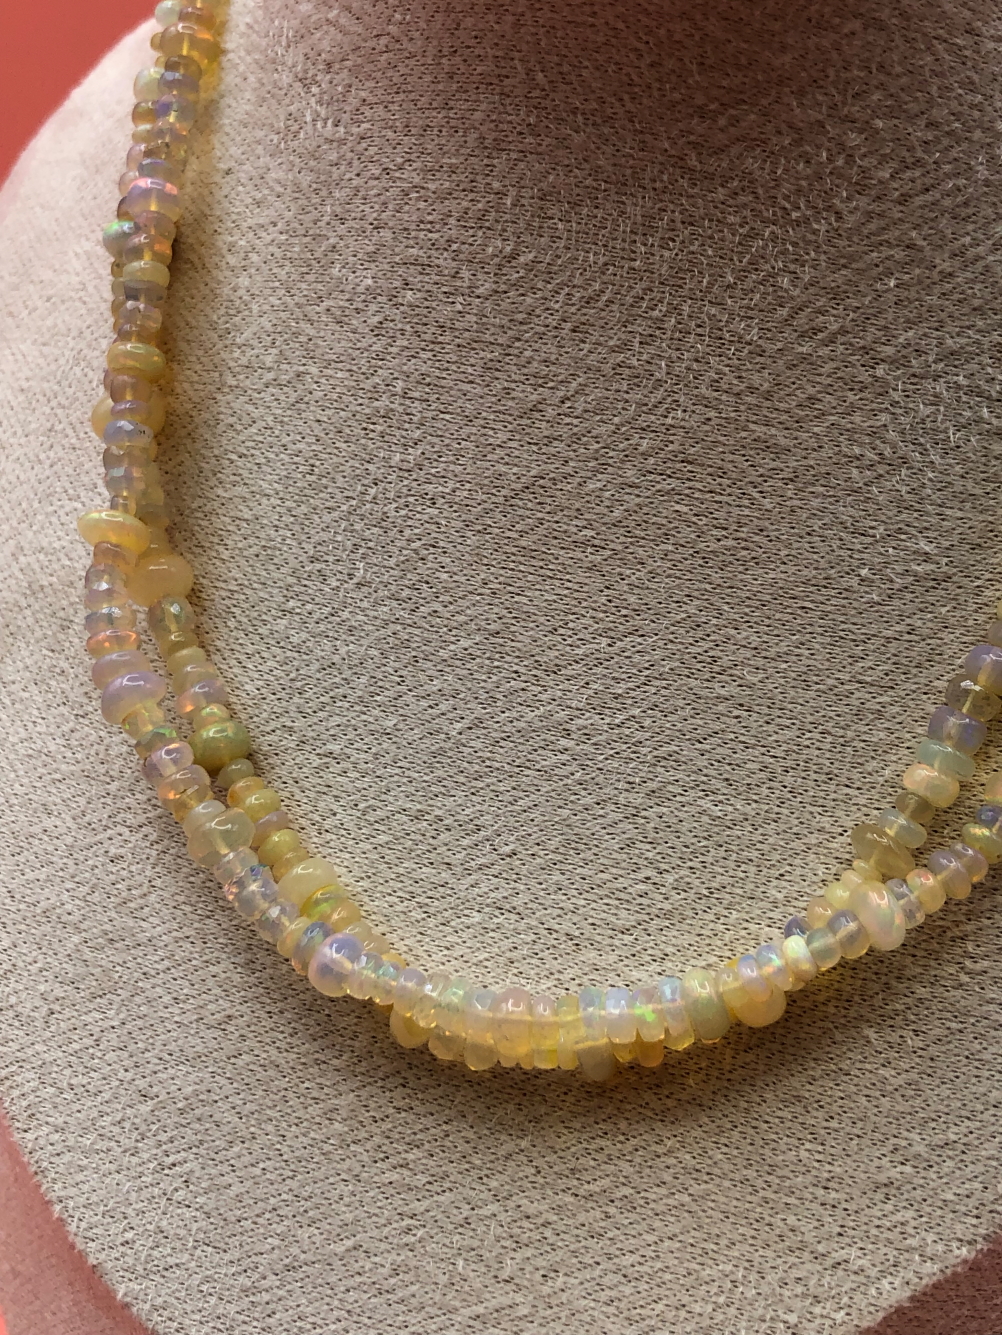 AN OPAL BEADED NECKLACE. VINTAGE OPAL ROUNDEL BEADS RECENTLY RESTRUNG. NECKLACE LENGTH 76cms. - Image 6 of 7